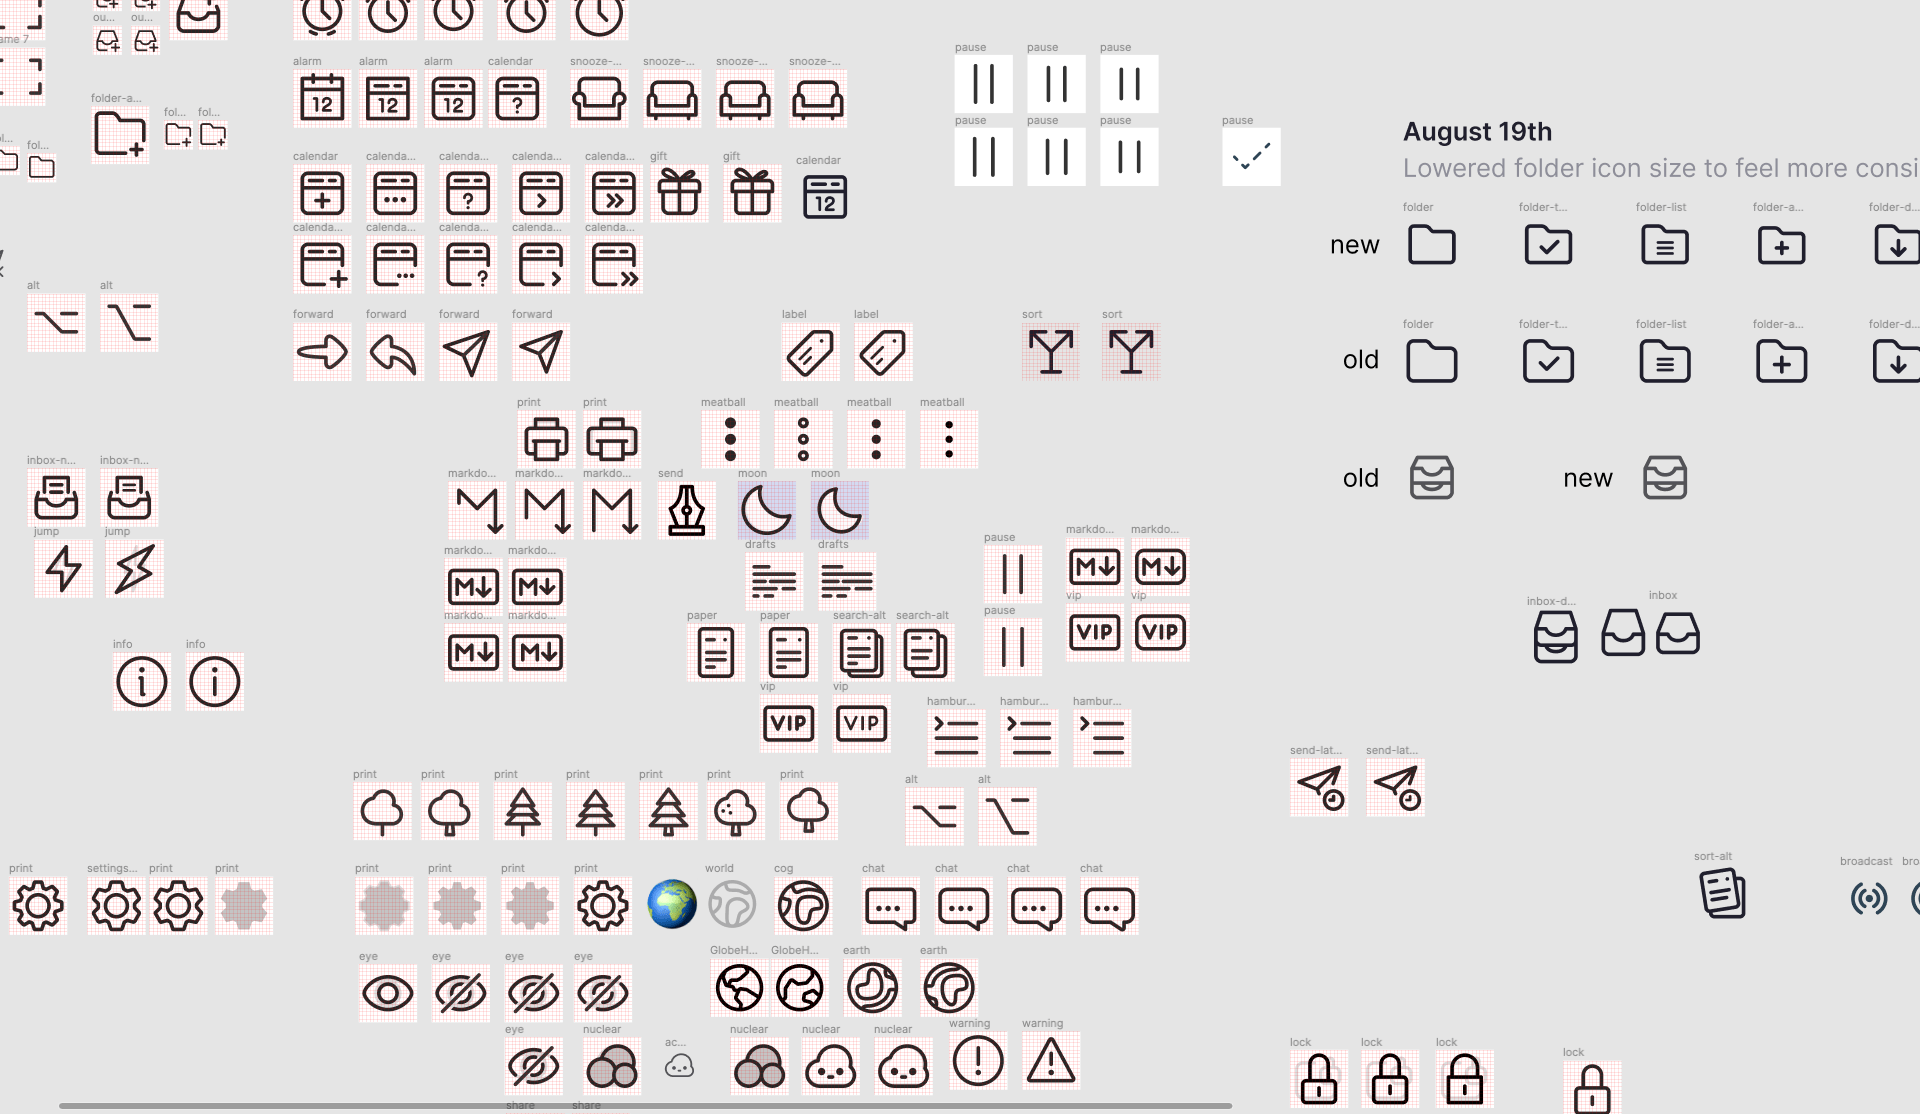 A screenshot of figma, with some old iterations of the icons